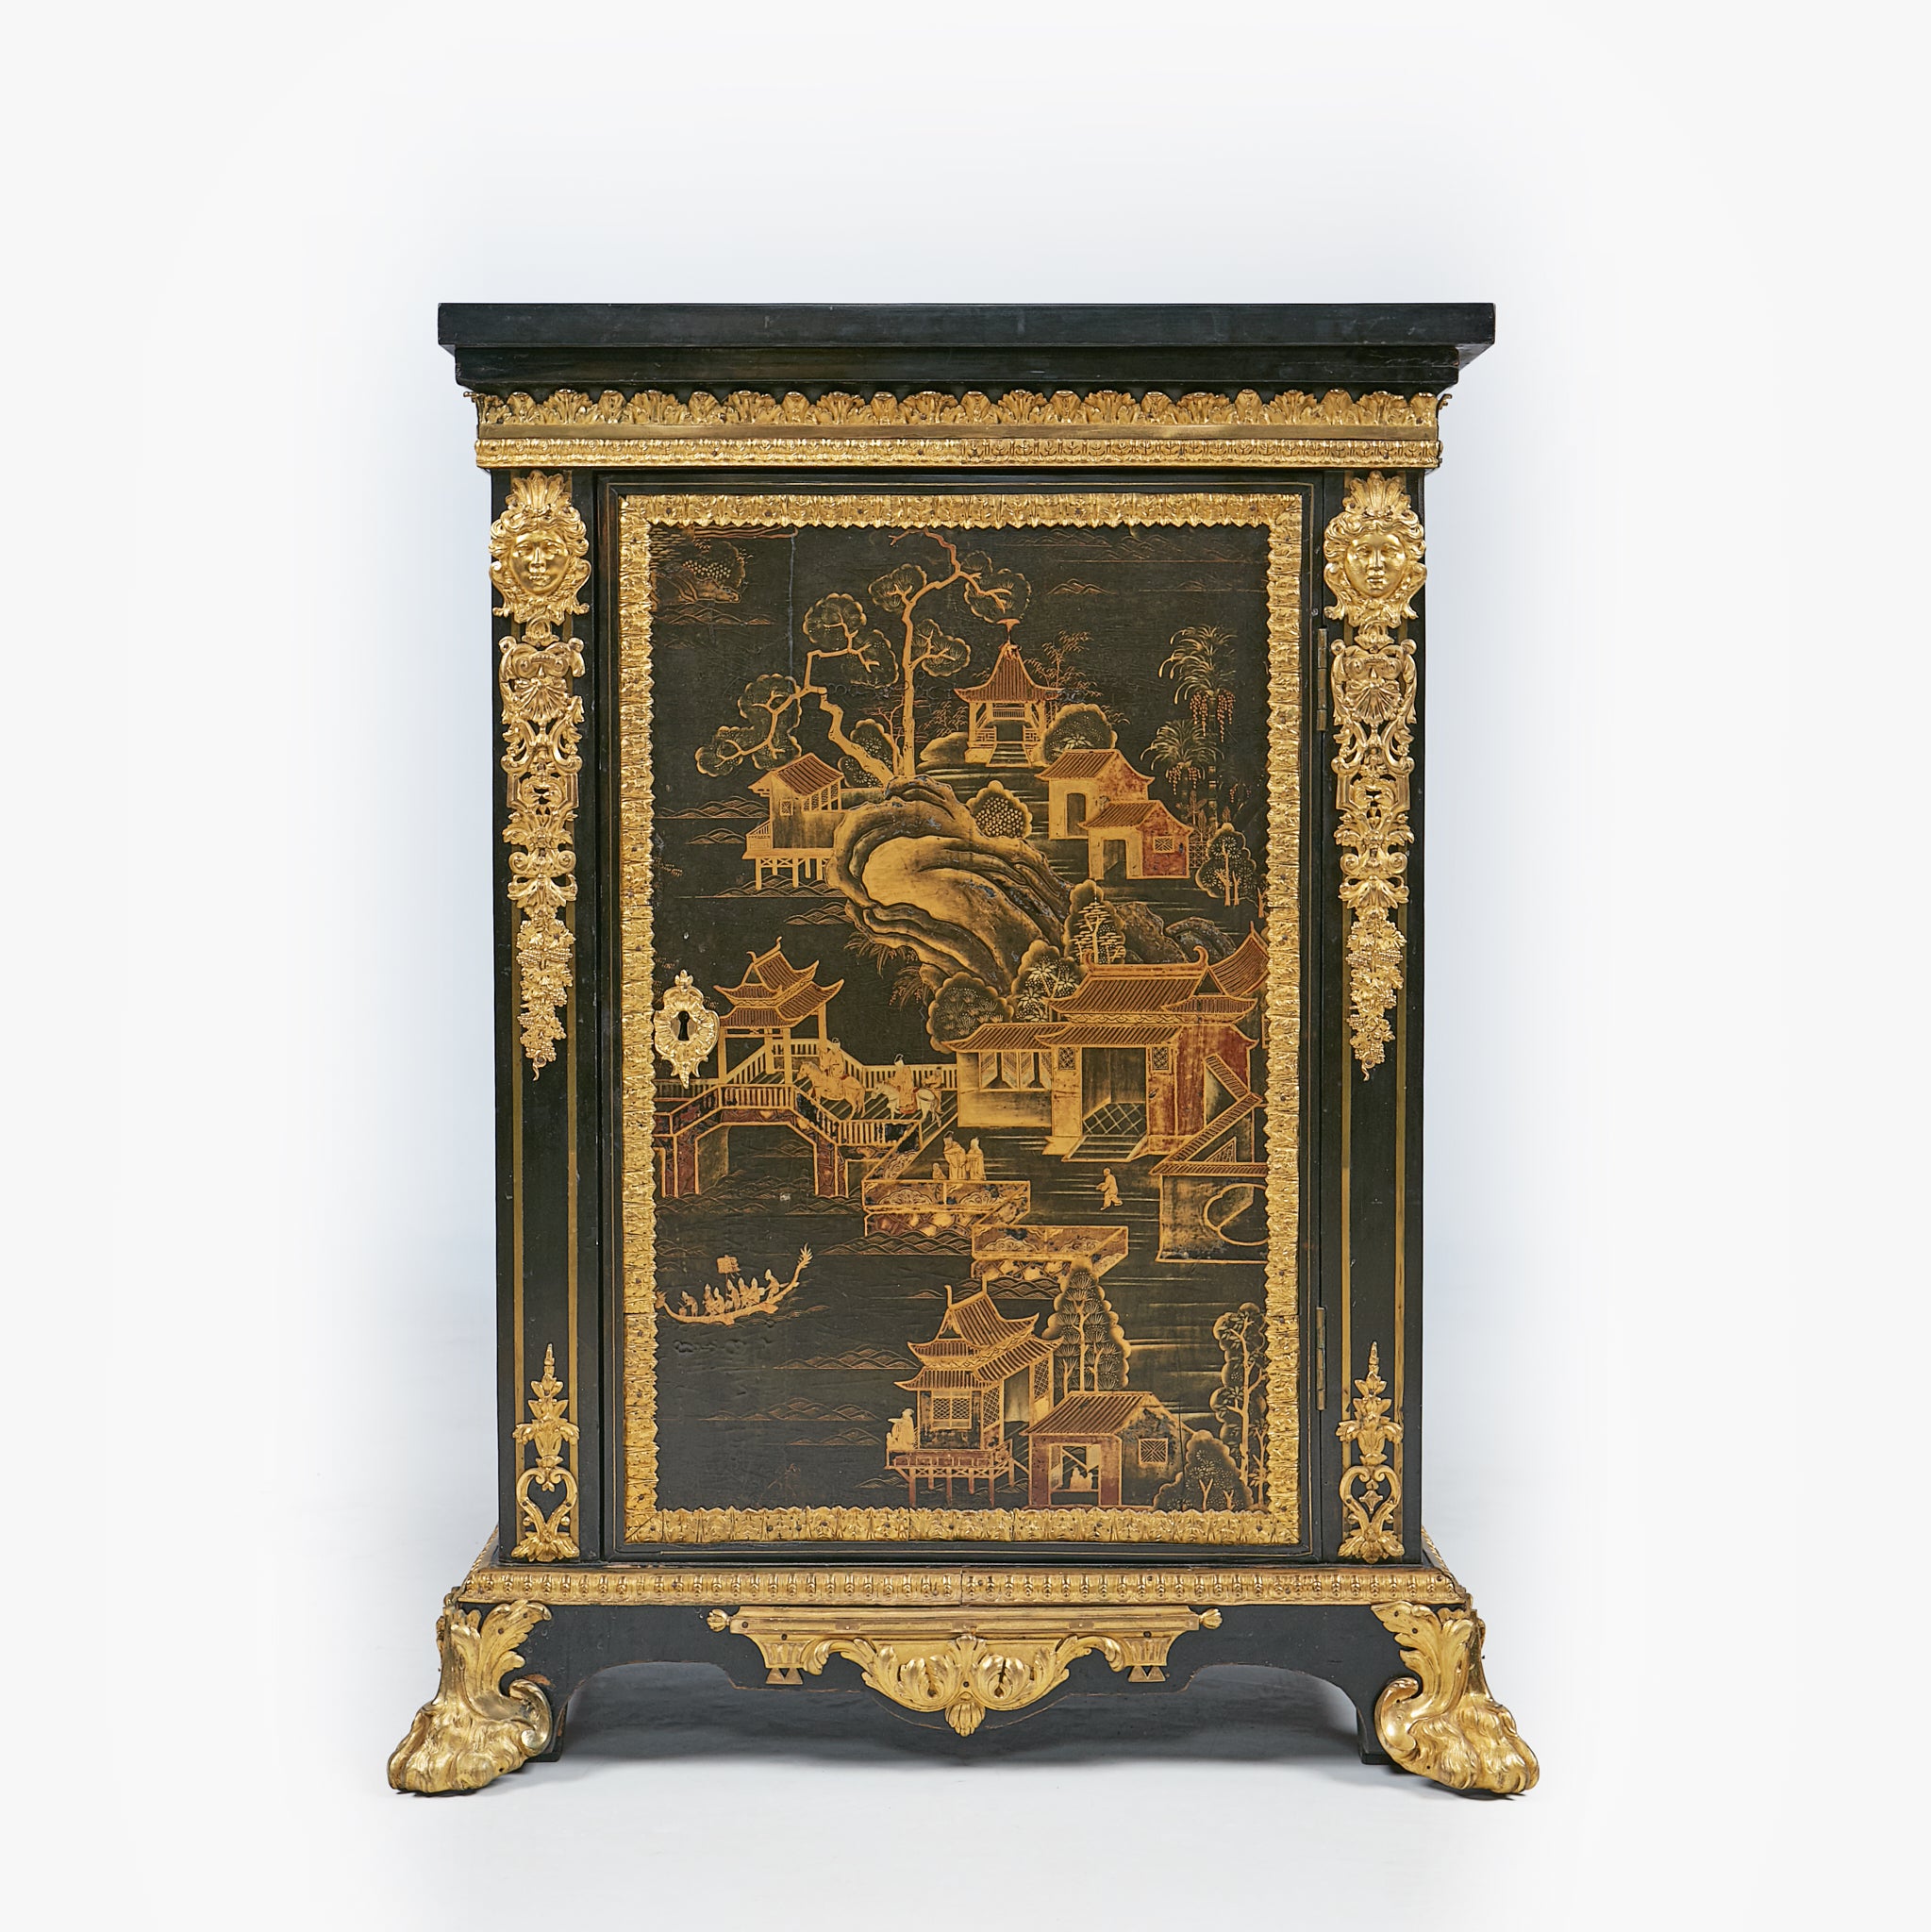 ORMOLU MOUNTED CHINOSERIE SIDE CABINET - REF No. 4039